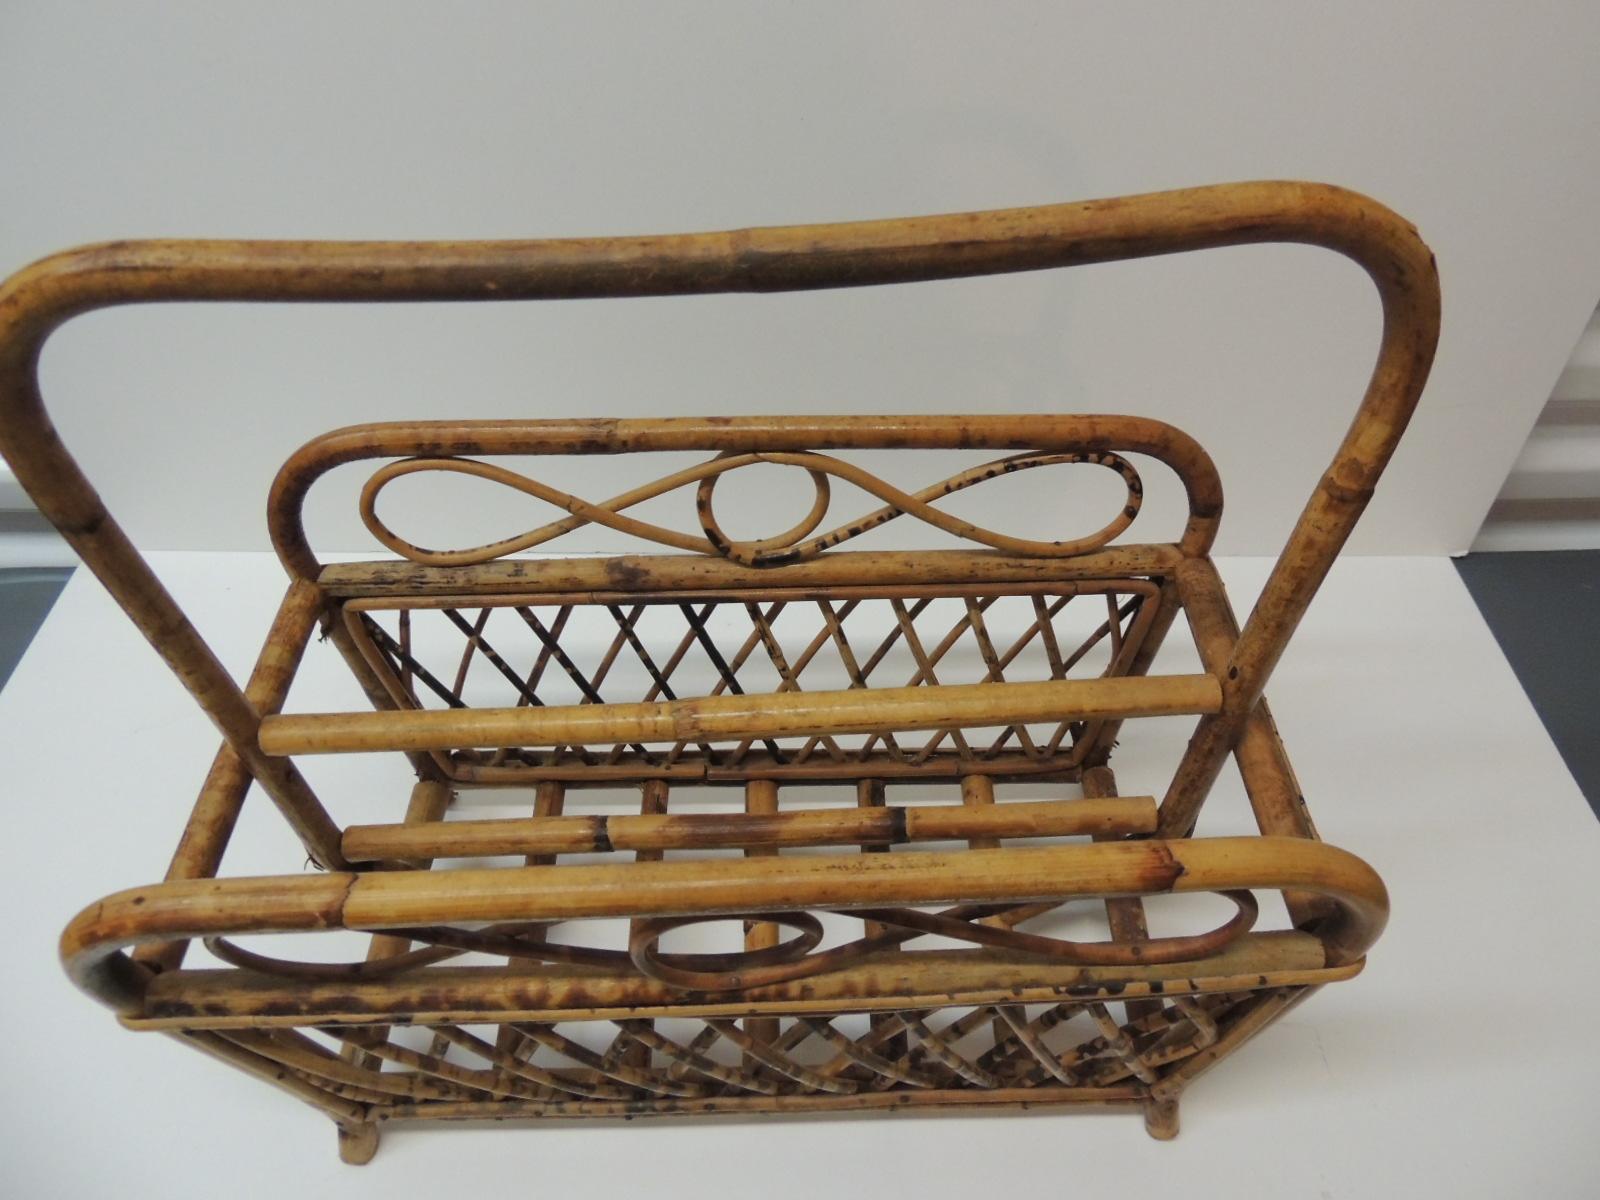 Hand-Crafted Vintage Faux Tortoise Magazine Rack in Bamboo and Rattan